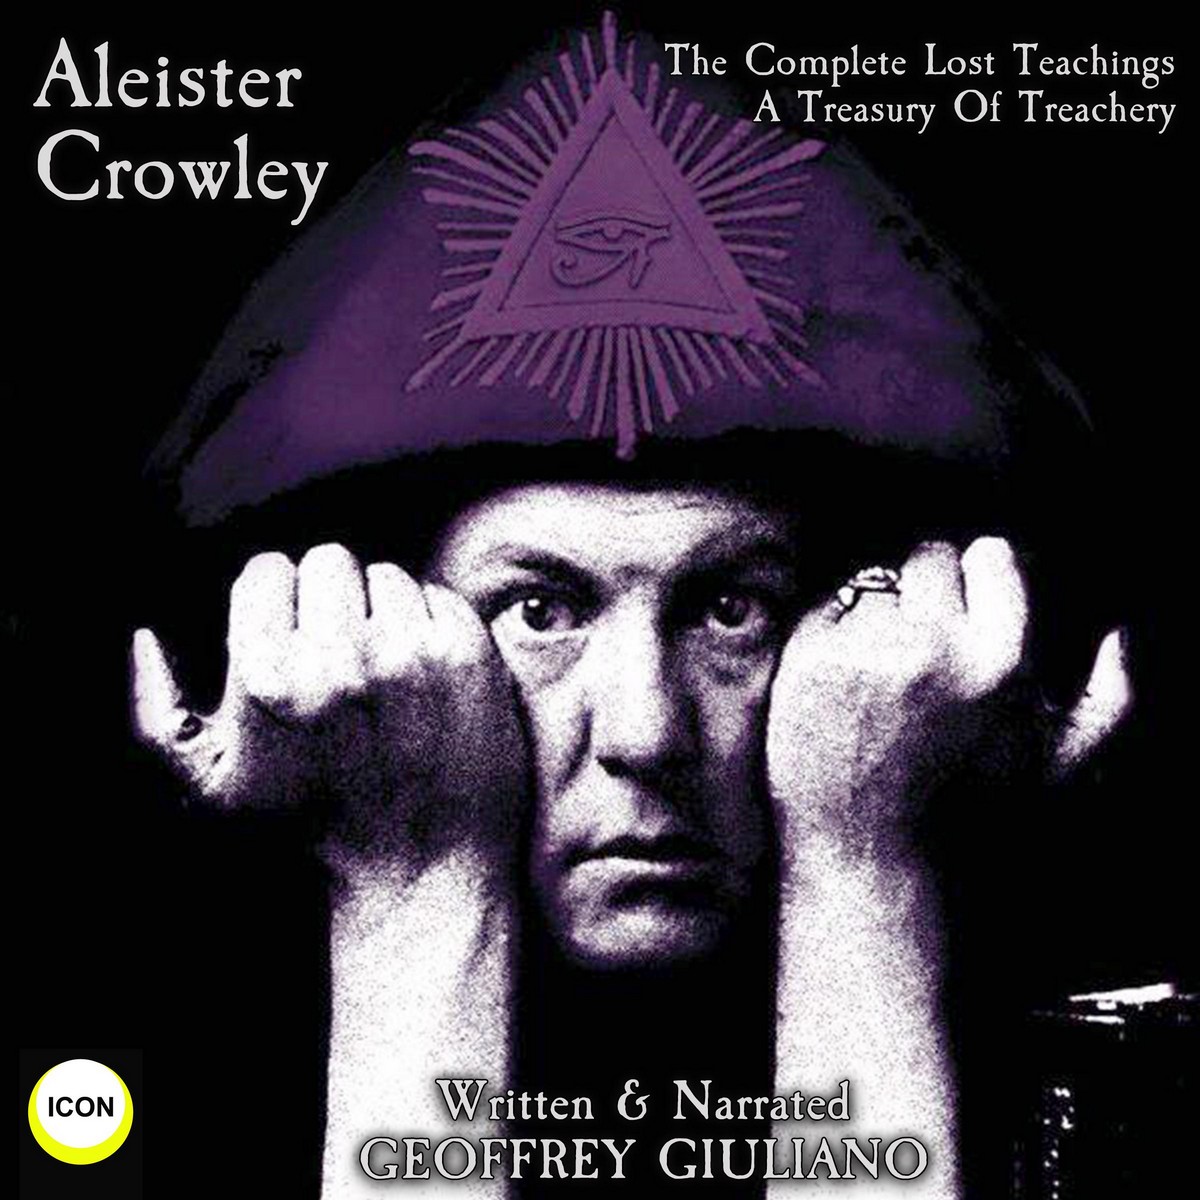 Aleister Crowley The Complete Lost Teachings – A Treasury Of Treachery